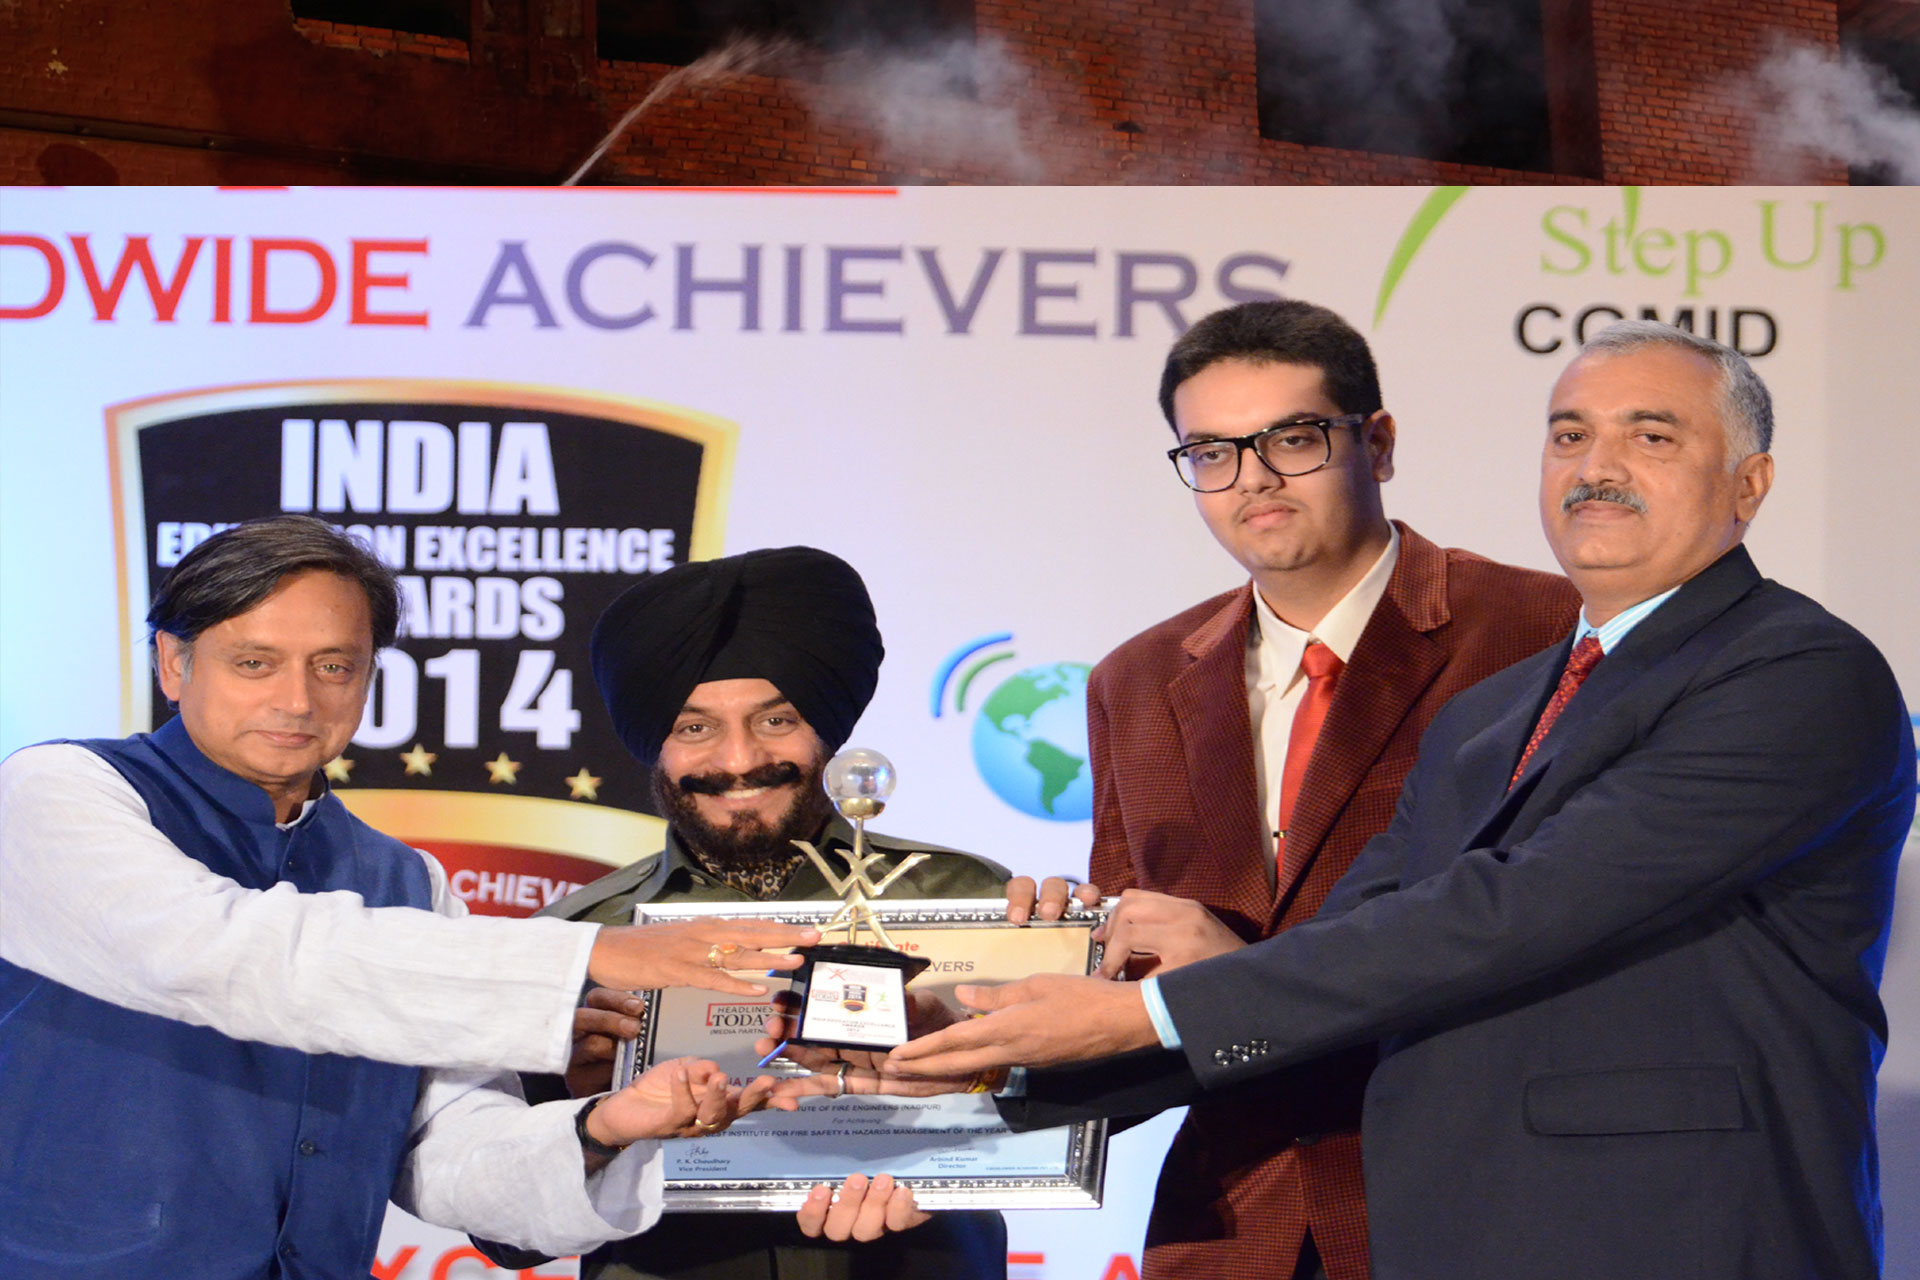 IFE Awarded INDIA EDUCATION EXCELLENCE AWARDS 2014 by H.R.D. Minister Govt. of India in New Delhi